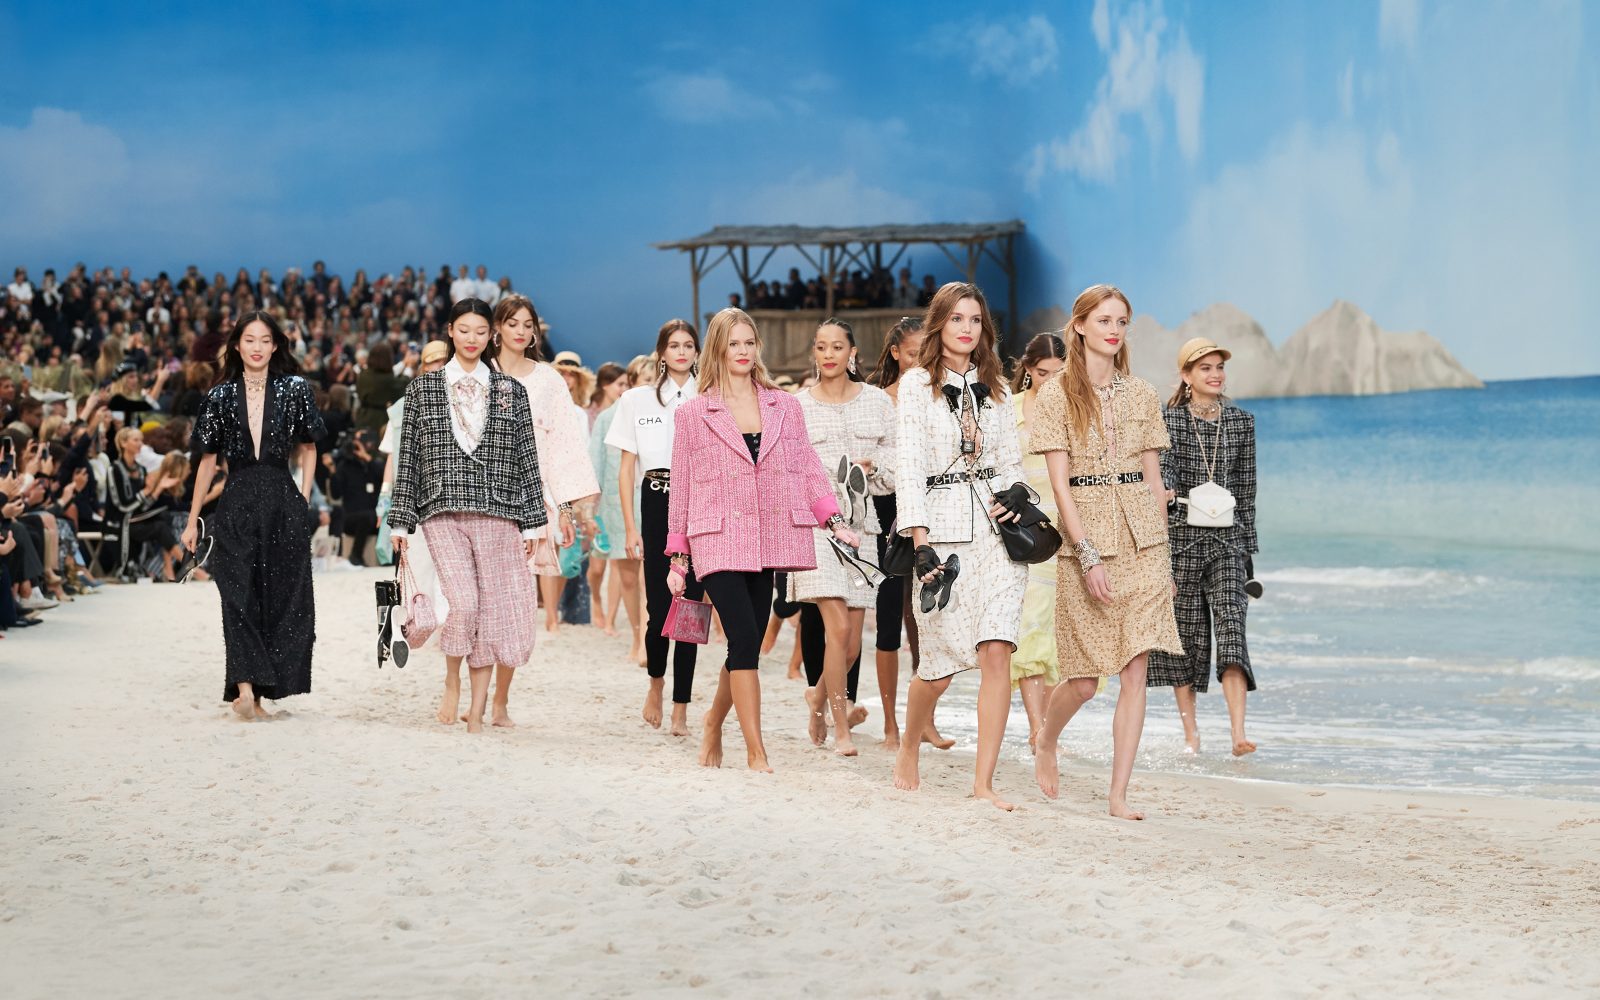 CHANEL Cruise 2023/24 in Los Angeles is a dreamy Californian party